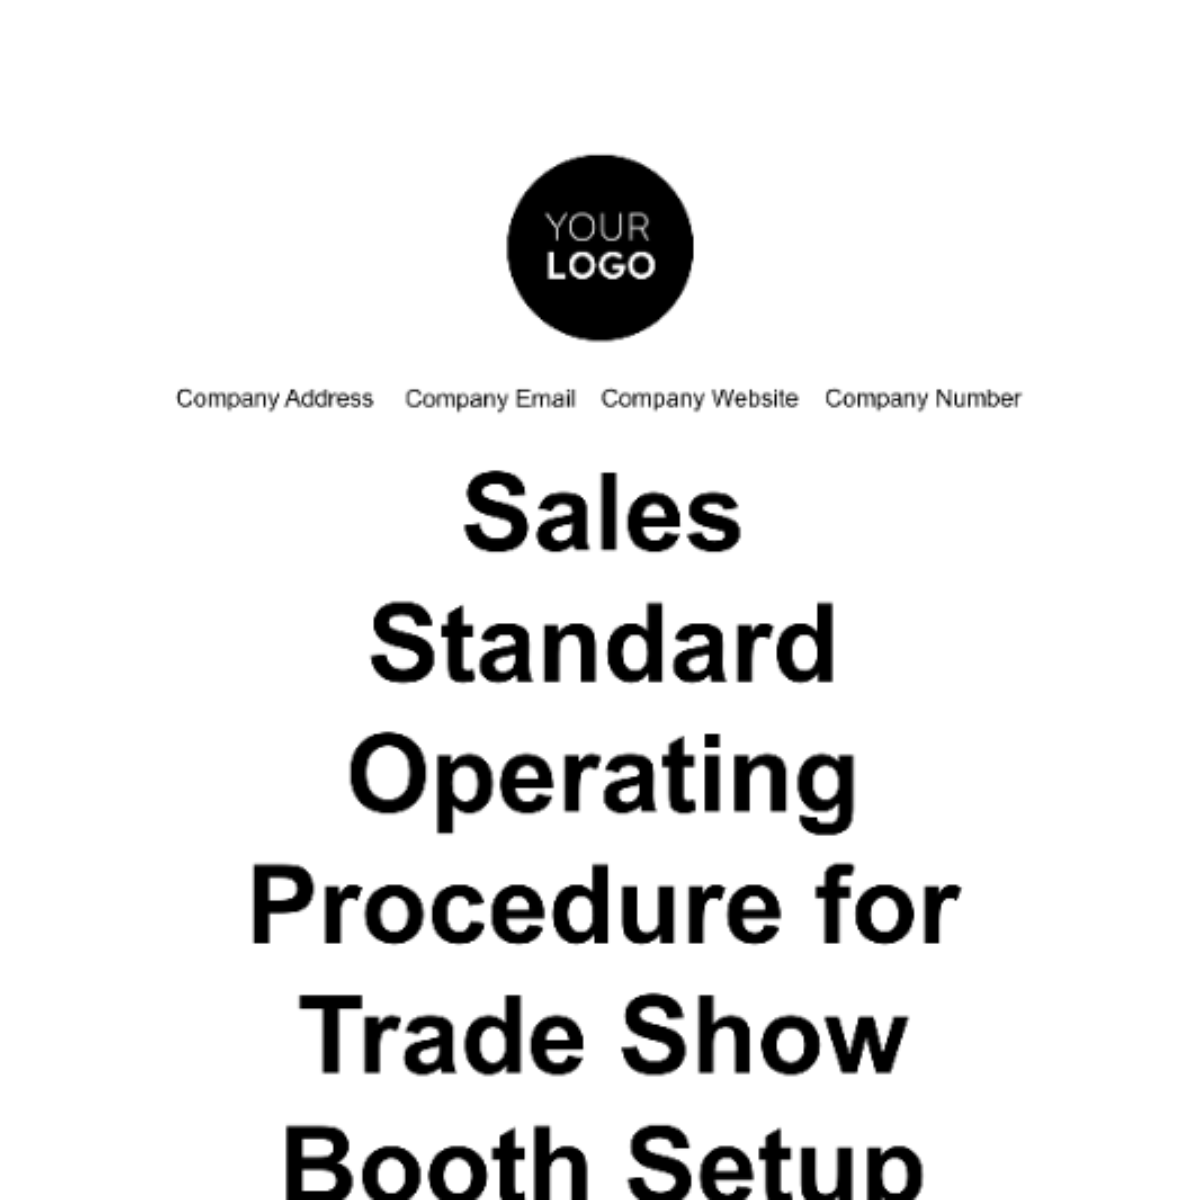 Sales Standard Operating Procedure for Trade Show Booth Setup Template